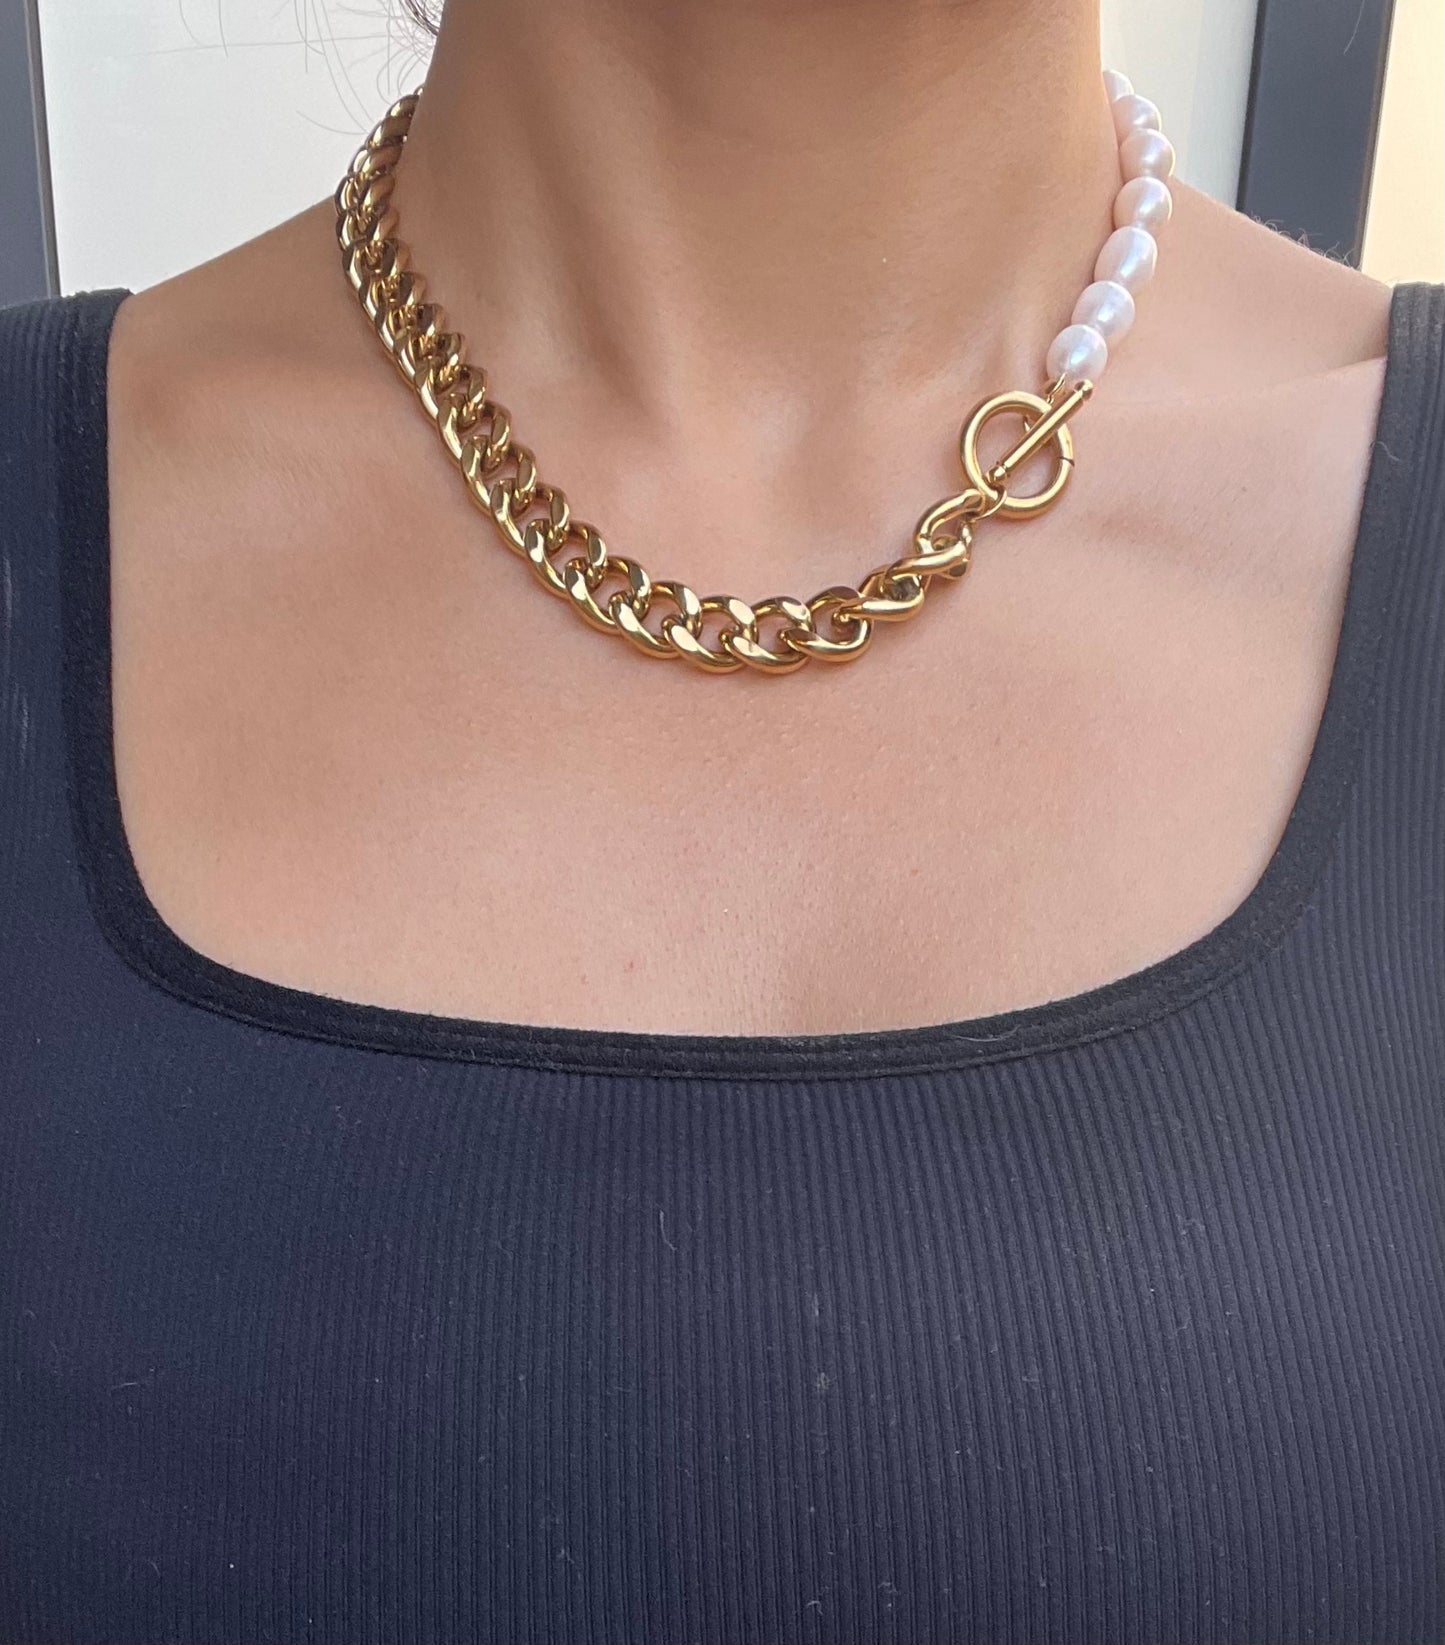 Evie Pearl & Chain Necklace